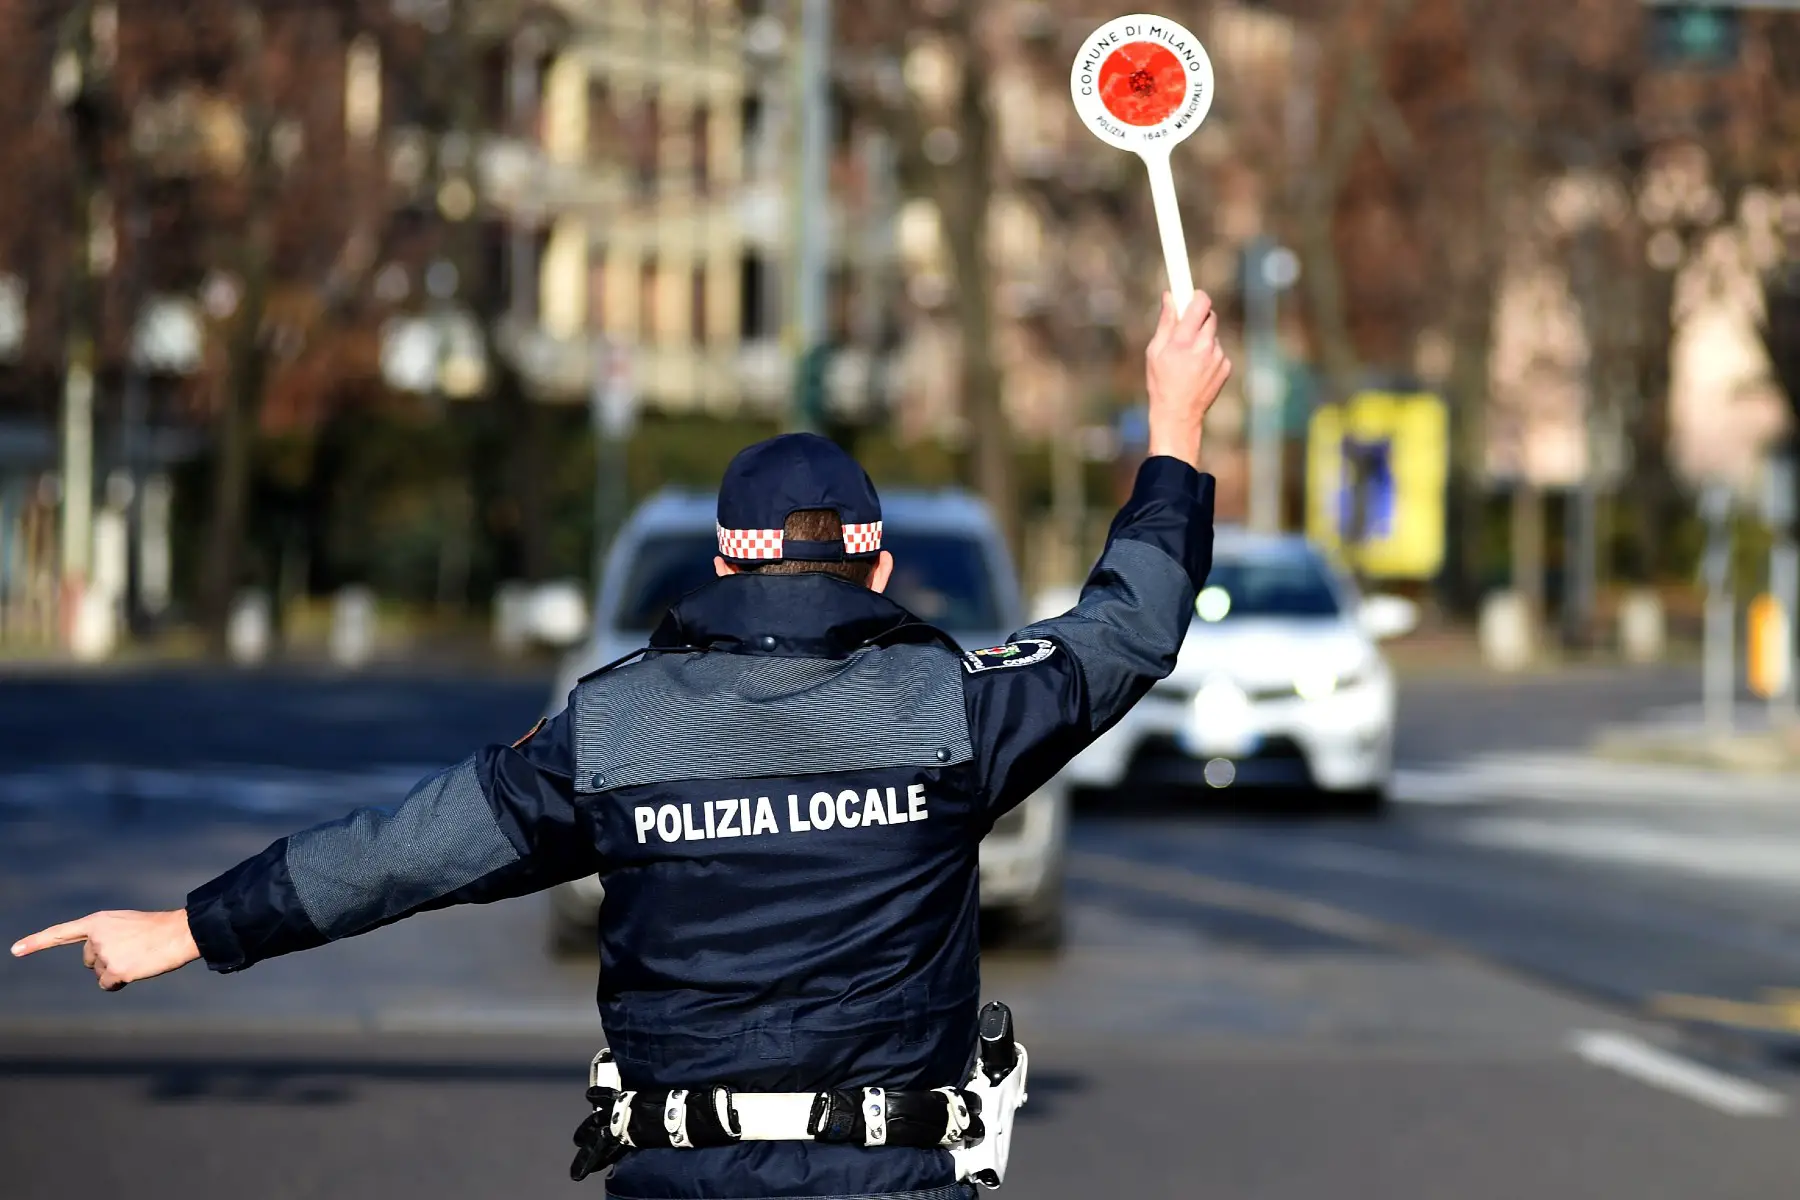 A local police officer in Milan, Italy, holding a stop sign and directing traffic to the side